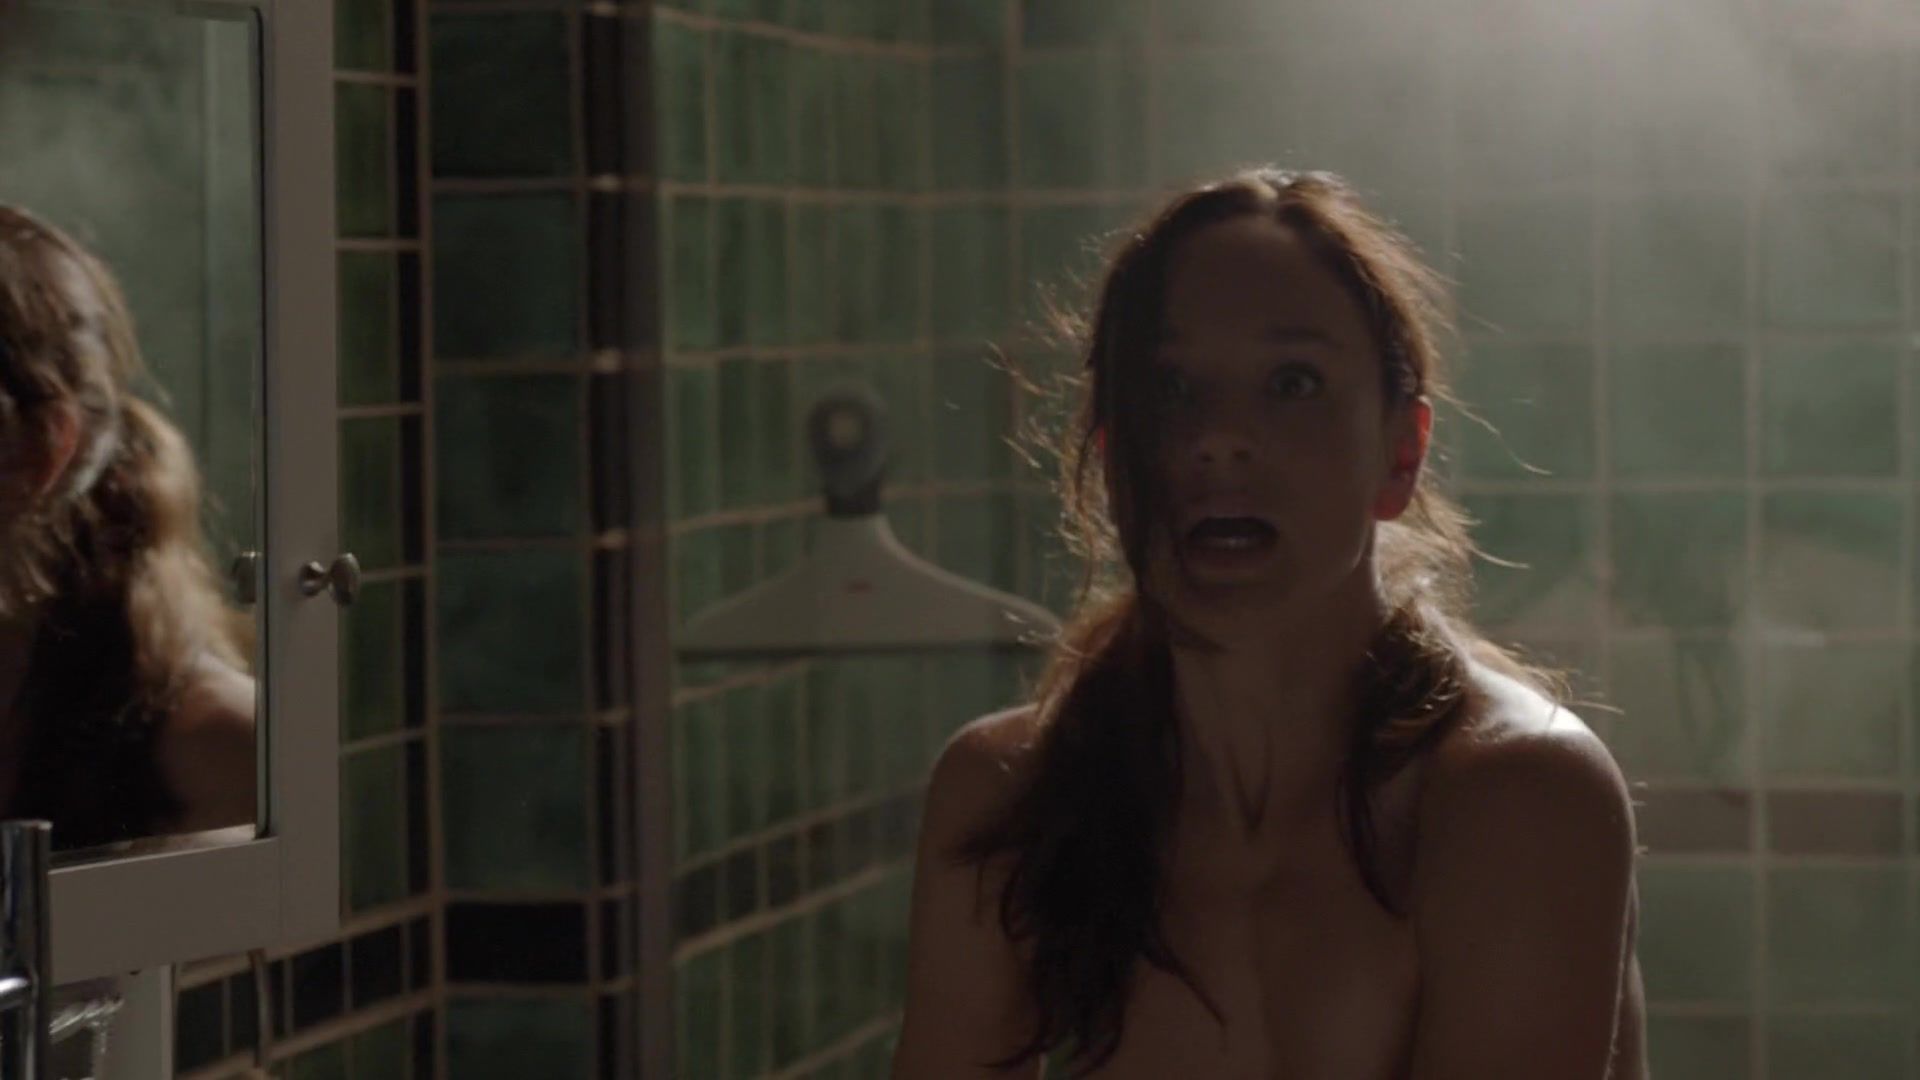 Dick Sucking Porn Naked Sarah Wayne Callies in Sex Scene from the TV show "Colony" s01e03 (2016) Celebrity